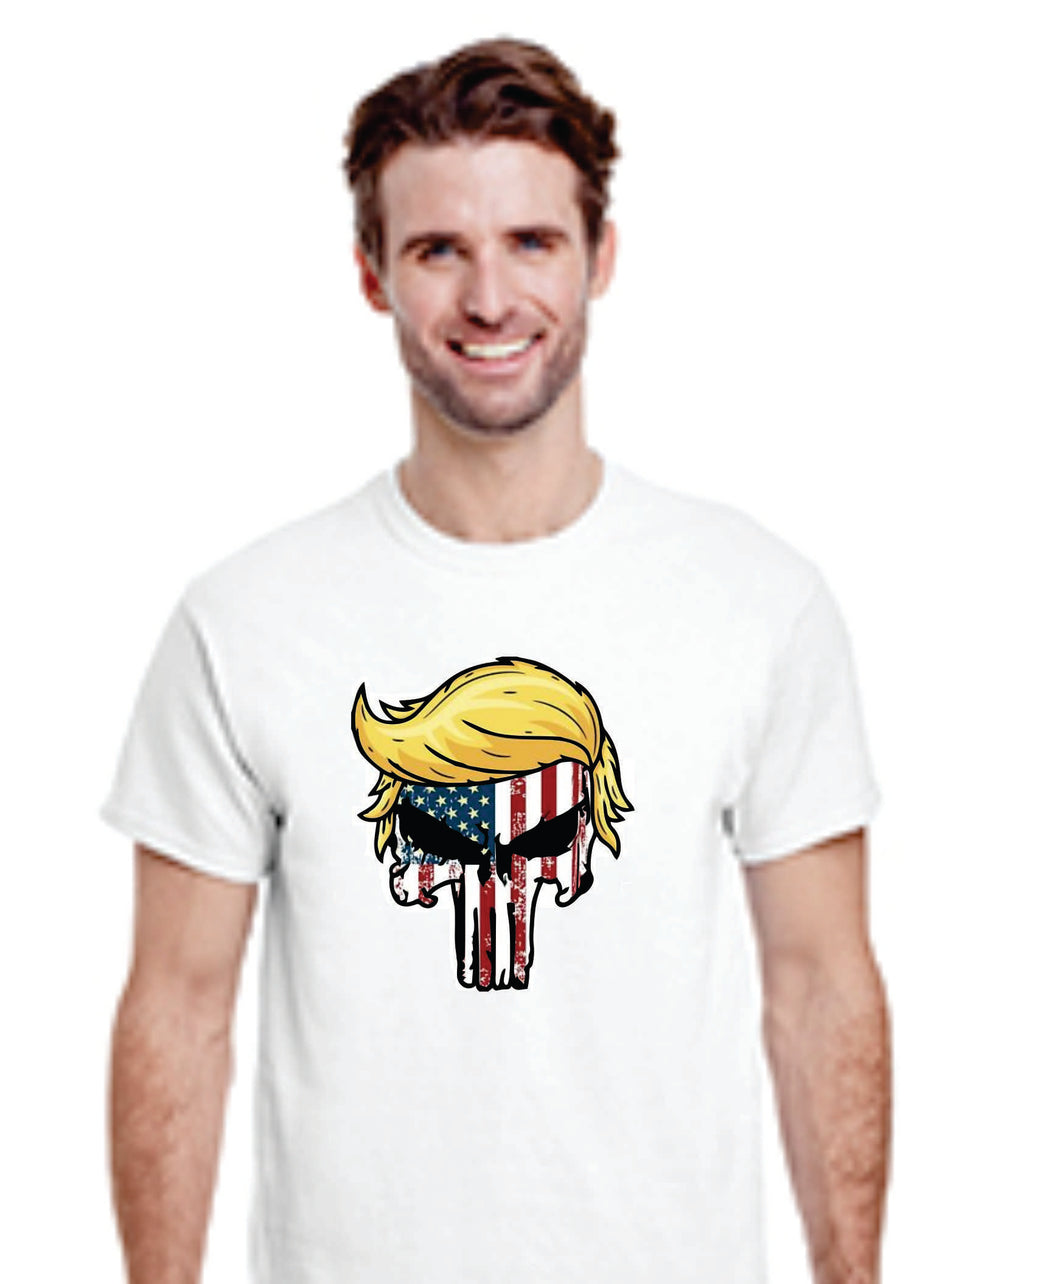 Keep On Trumpin' T-Shirt    001    **FREE SHIPPING in USA**